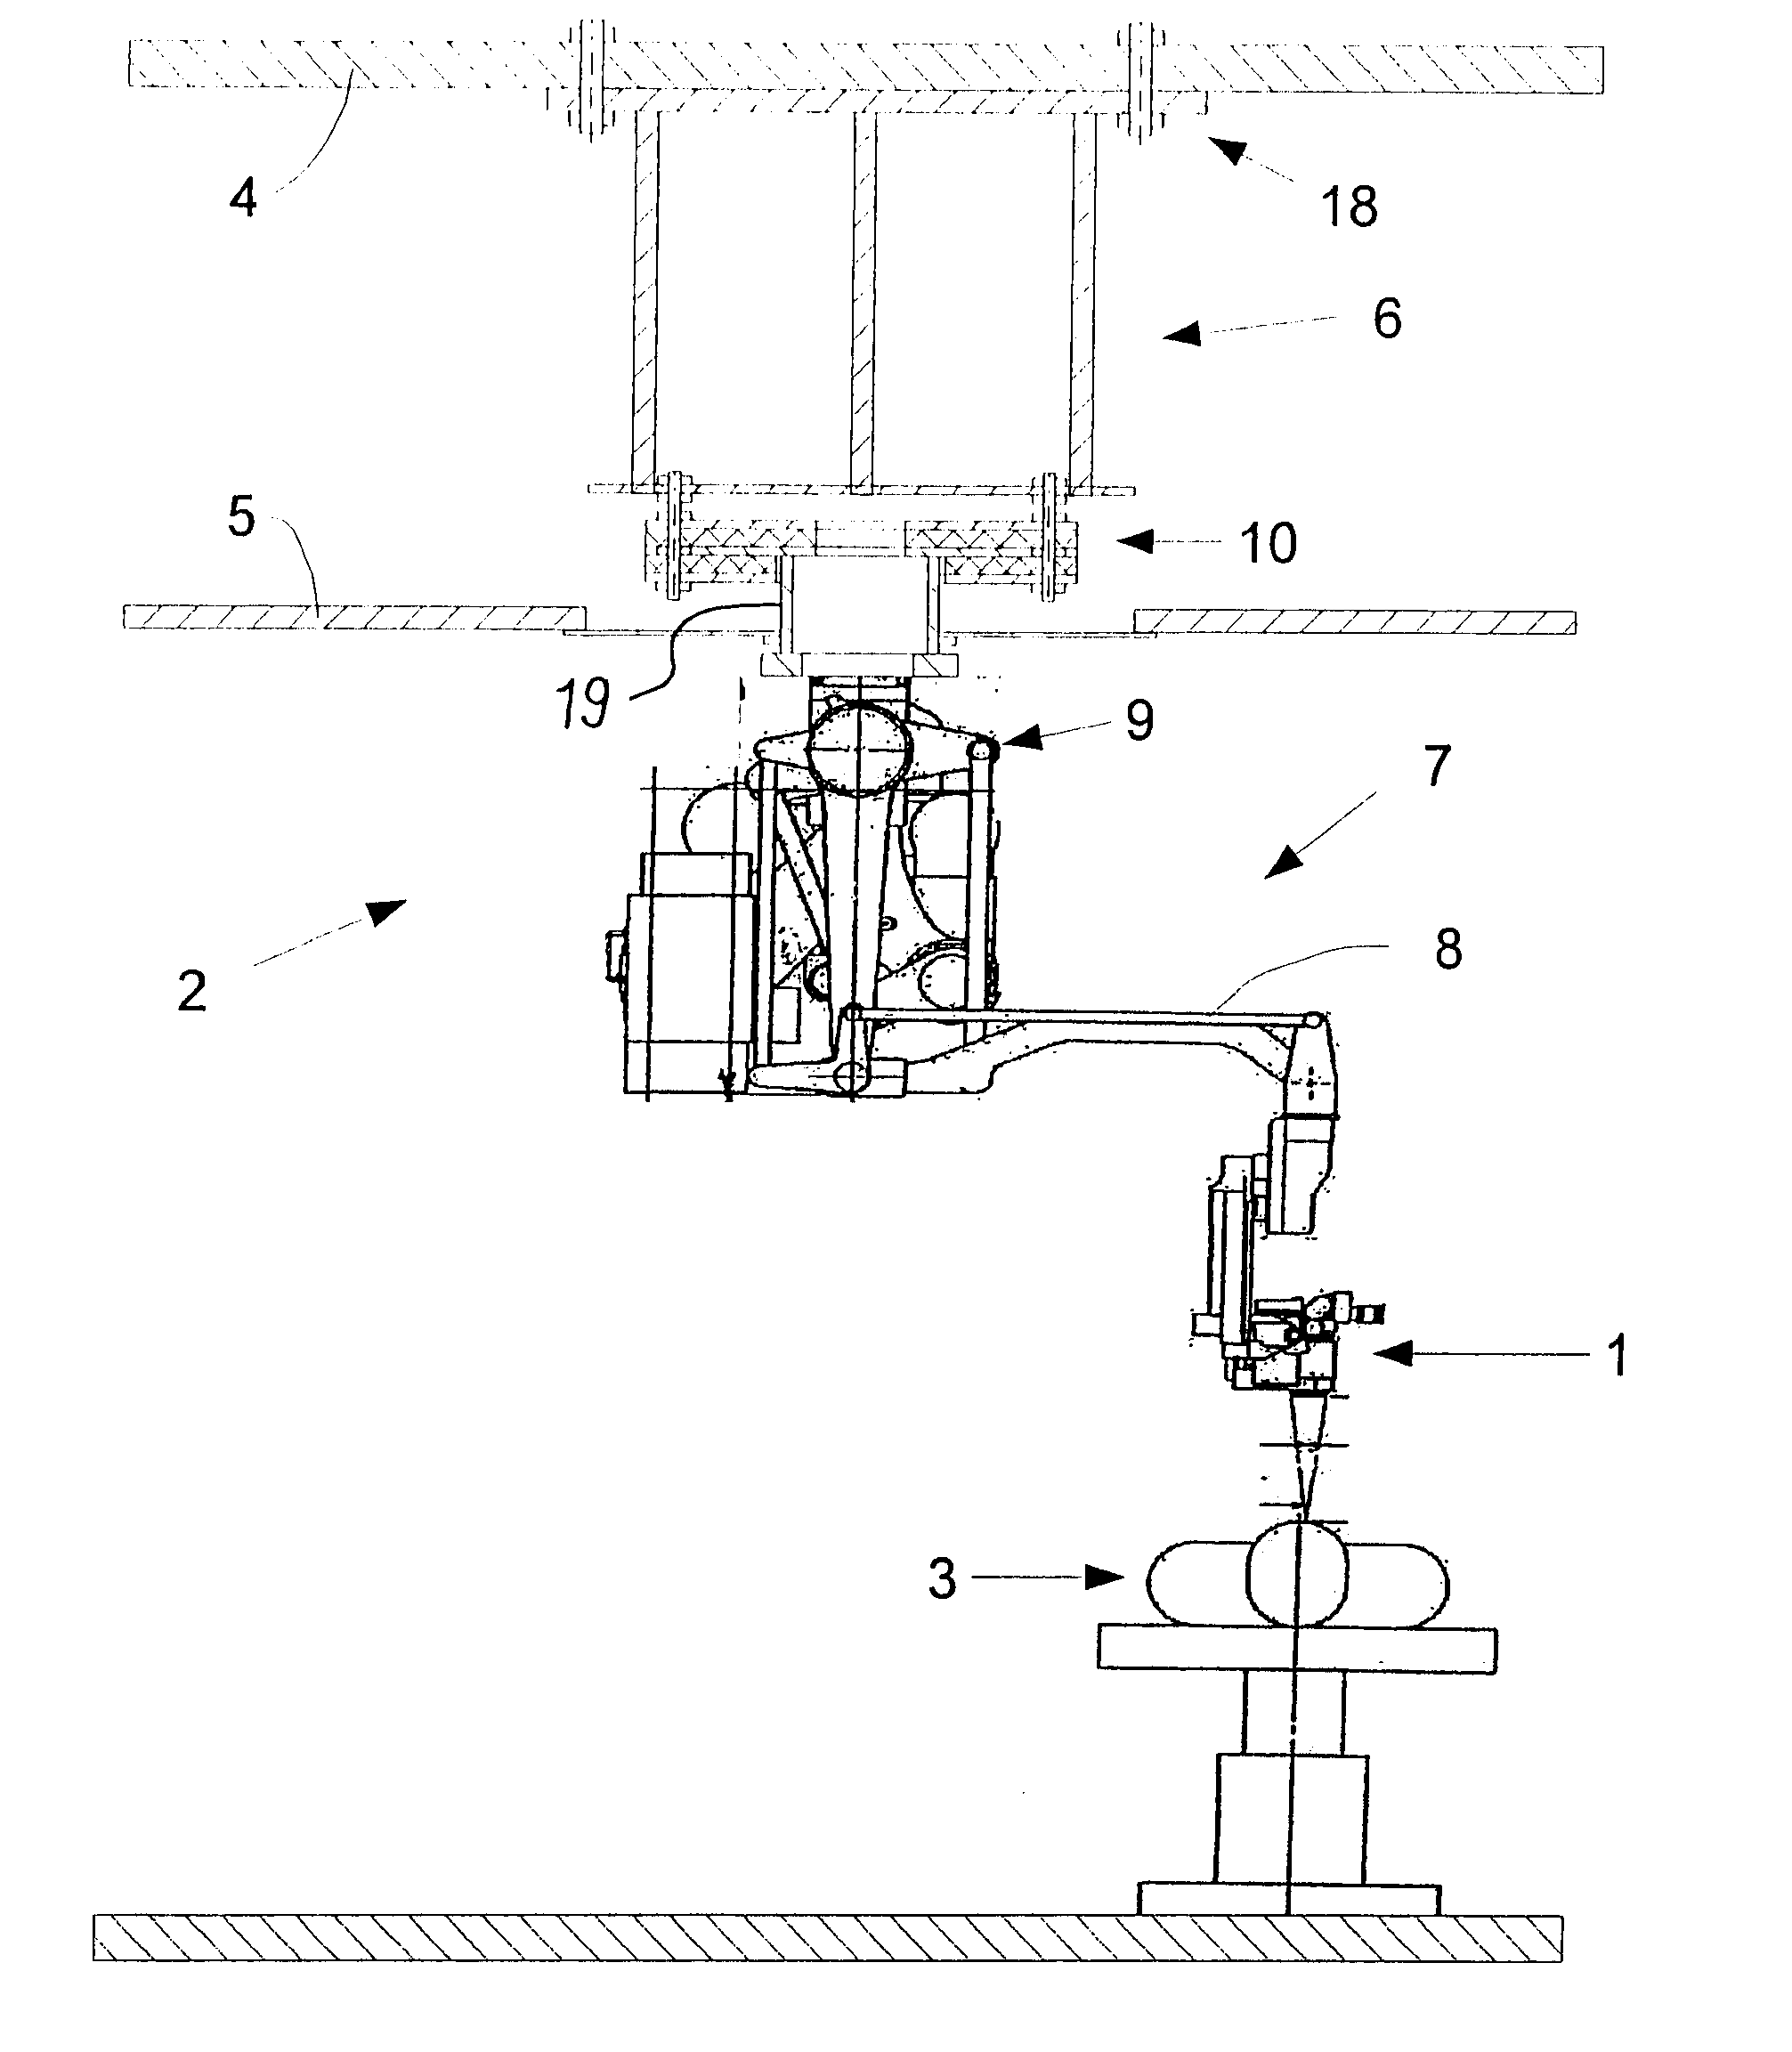 Vibration damping of a ceiling mount carrying a surgical microscope